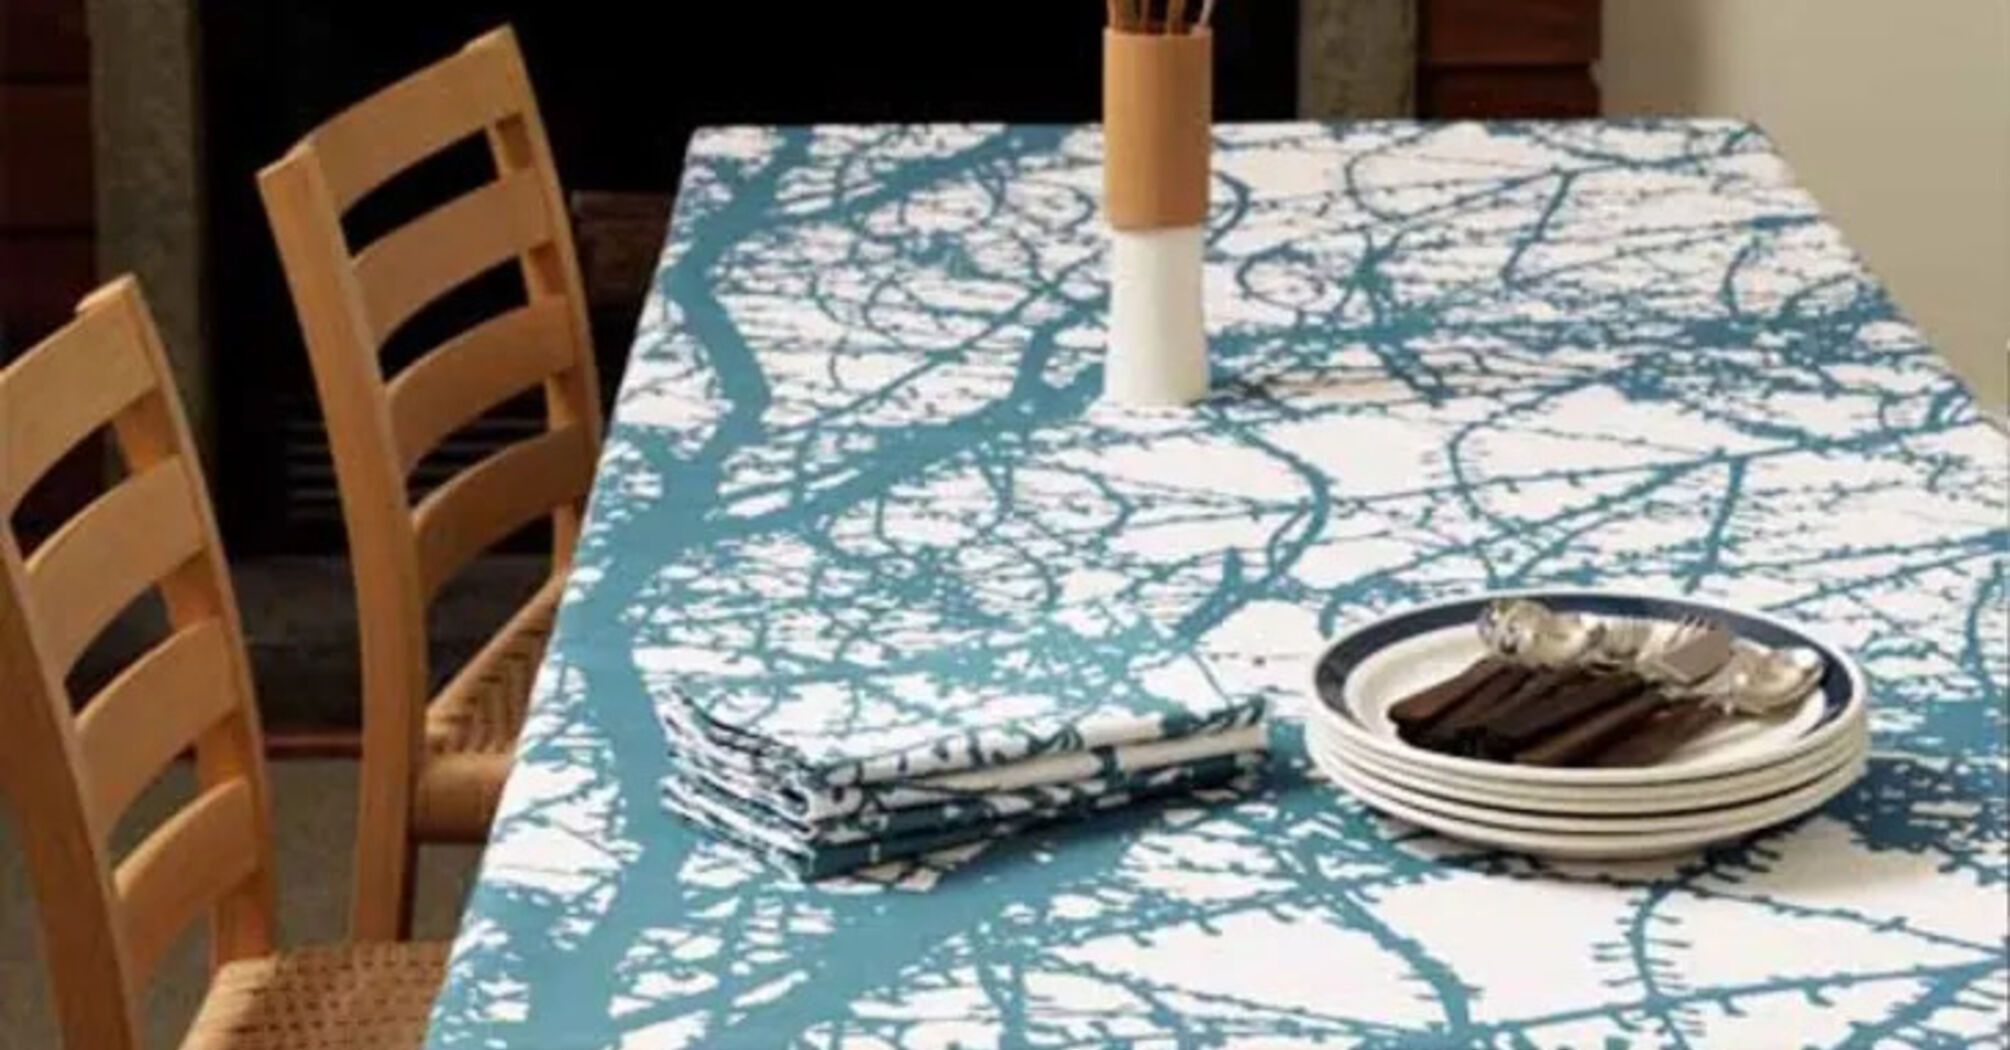 Why put money under the tablecloth on the table